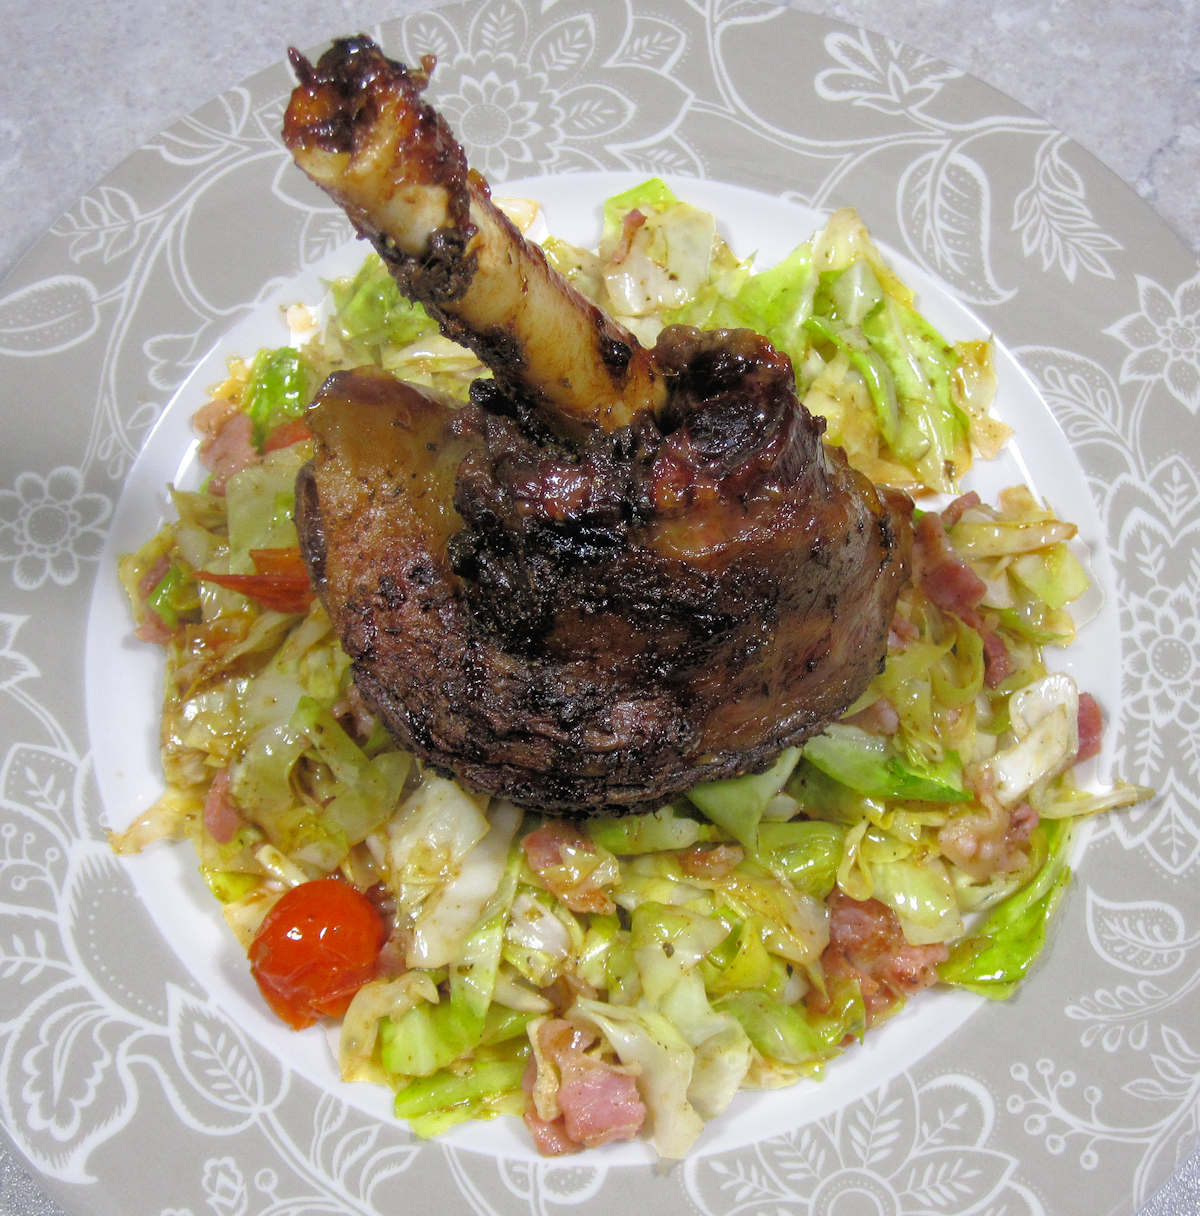 lamb shank with stir fried cabbage cuisinefiend.com